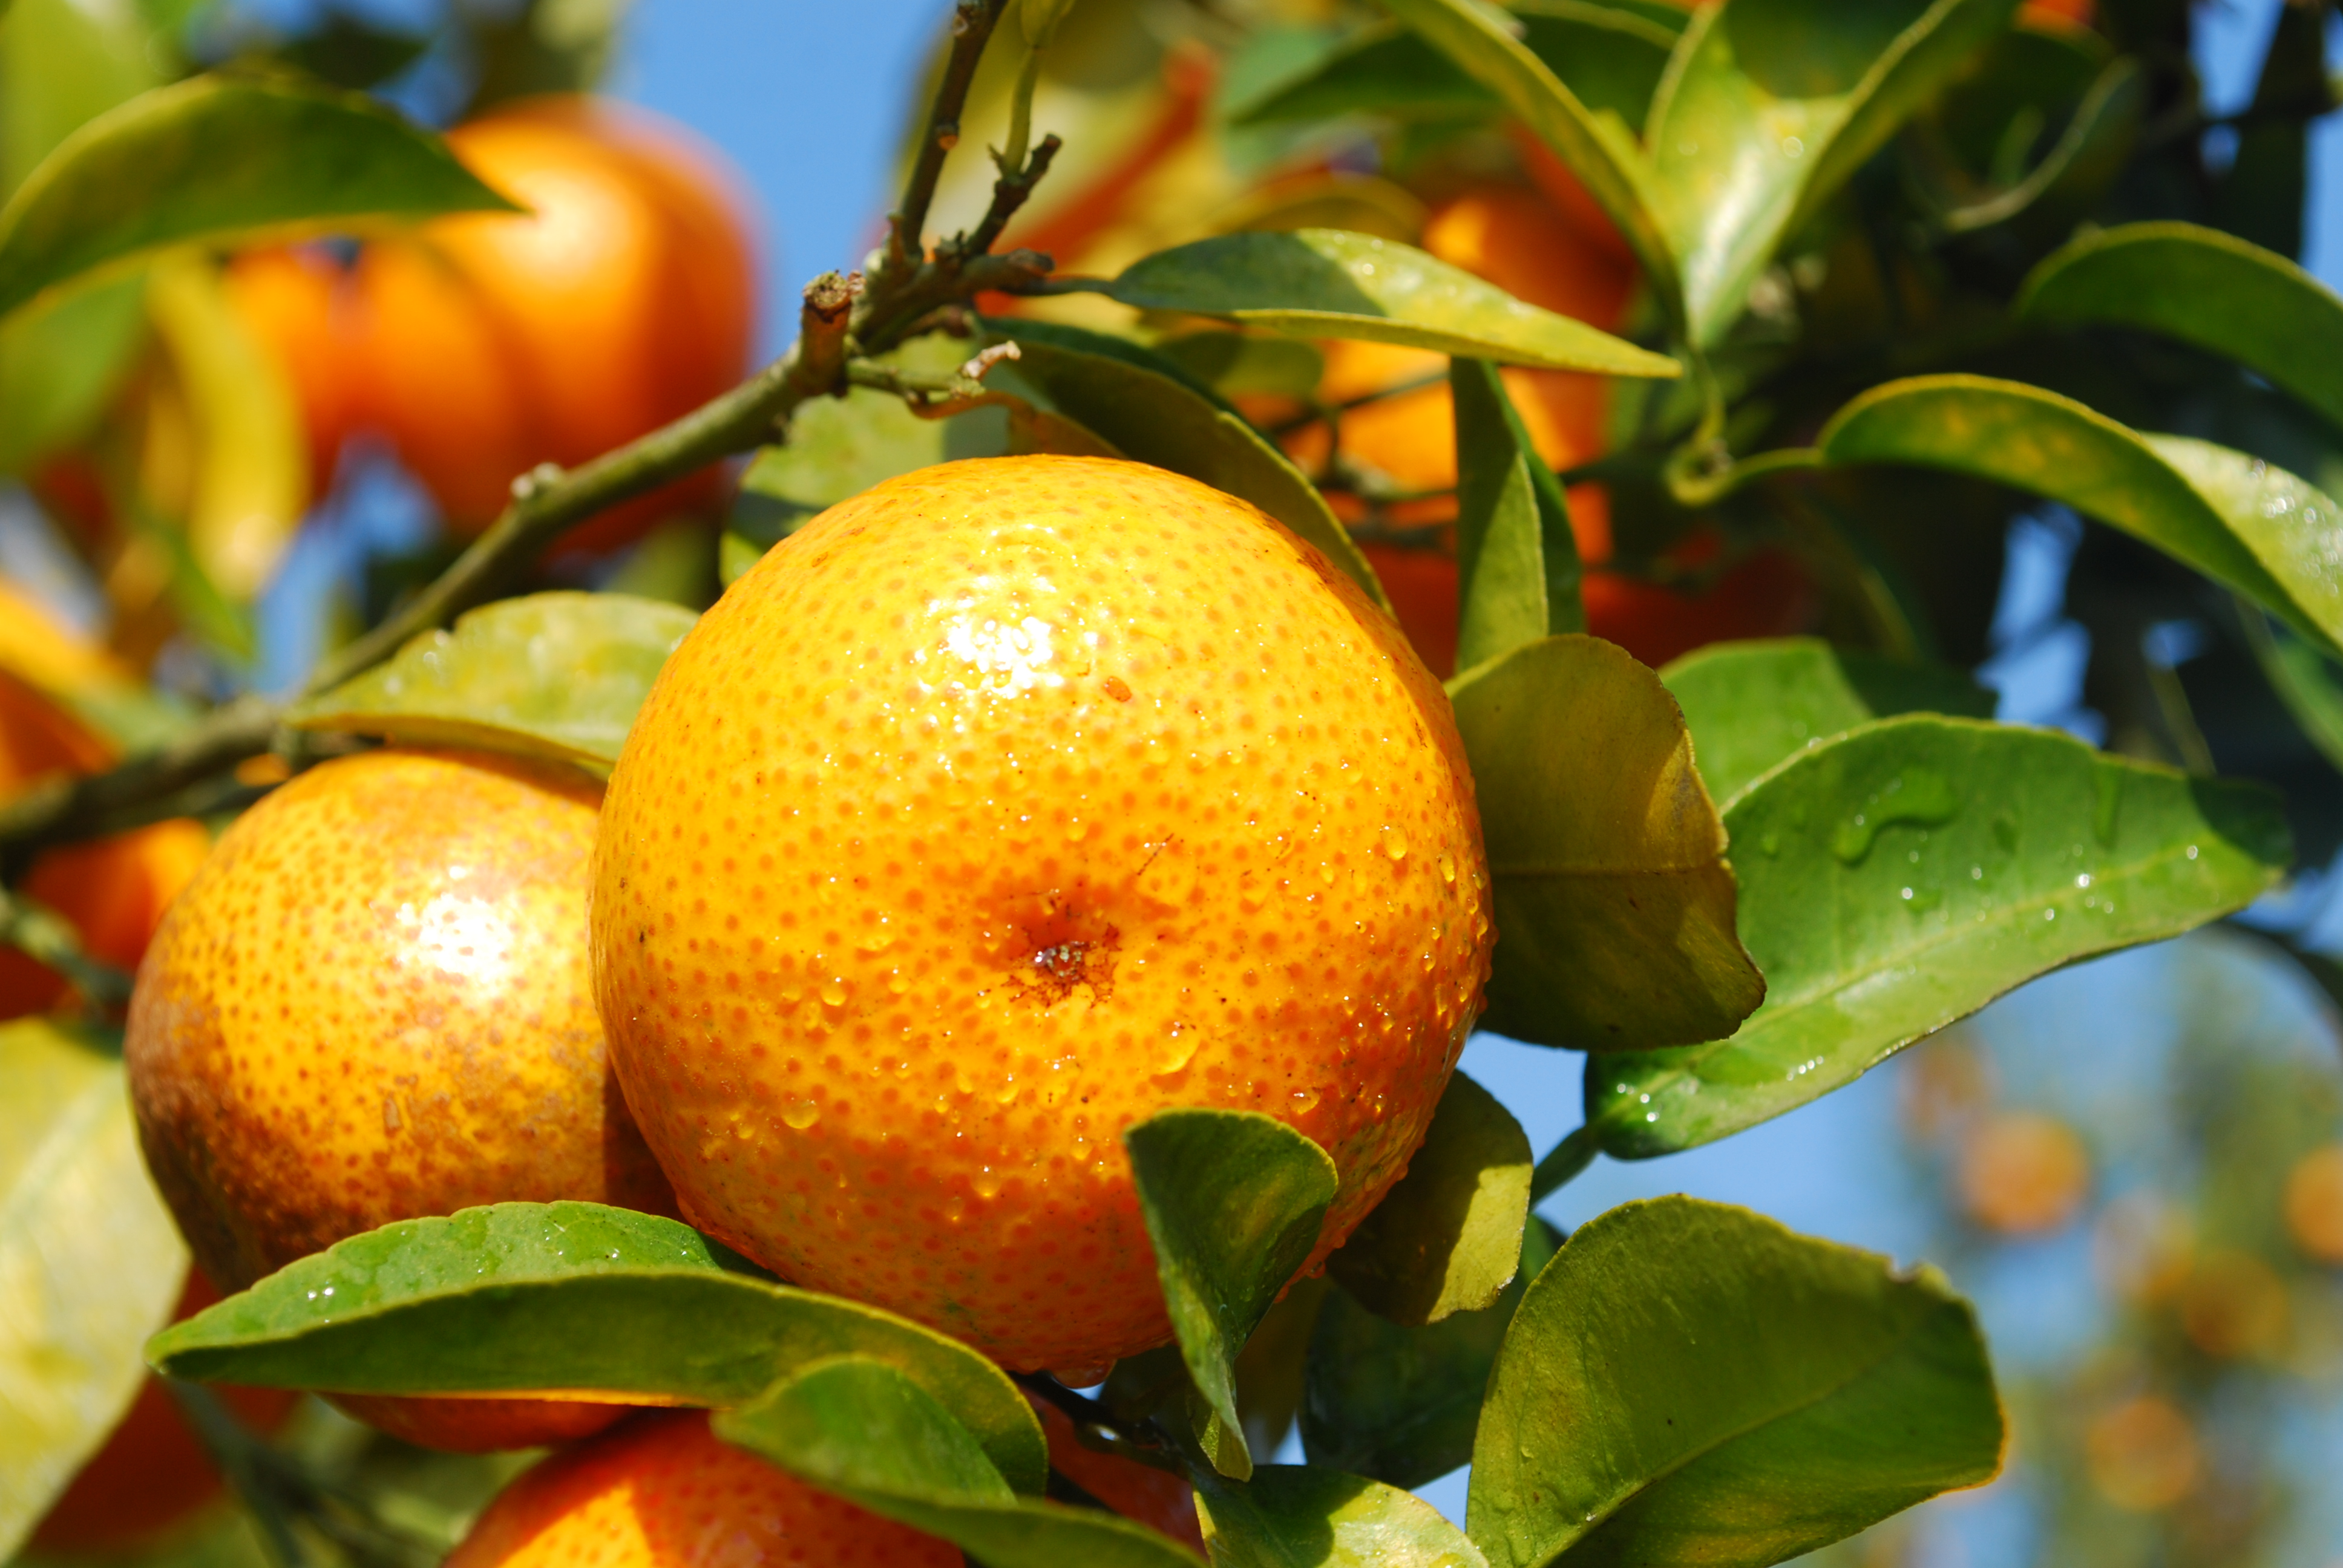 About citrus reddening and coloring